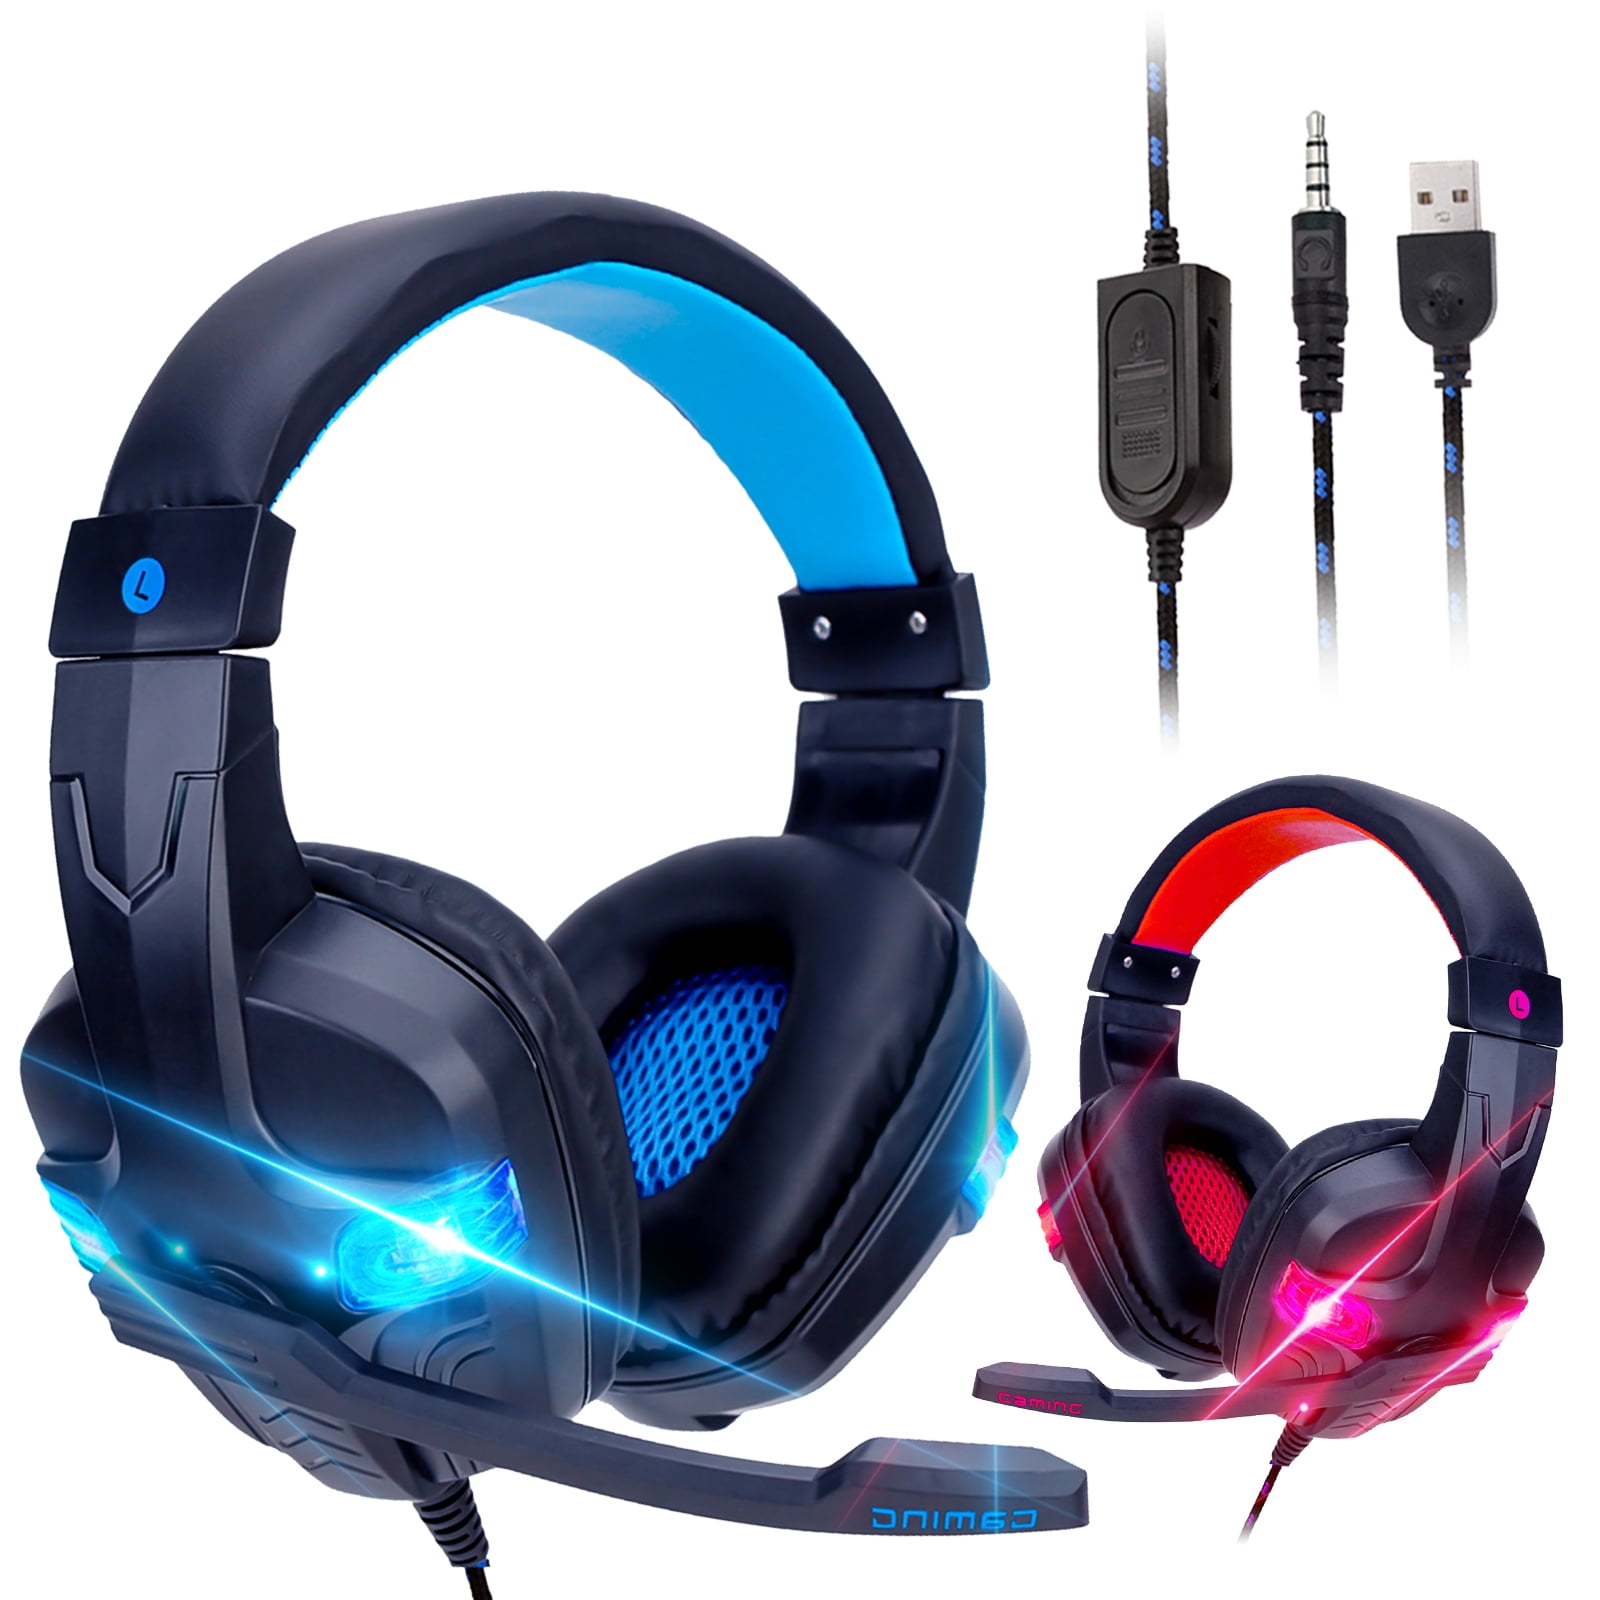 TSV Gaming Headset with 3D Surround Sound, PS4 Xbox One Headset with Noise Cancelling Mic &amp; LED Light, Gaming Chat Headset, Over-Ear Gaming Headphones for PC, Xbox One, PS4, Nintendo Switch